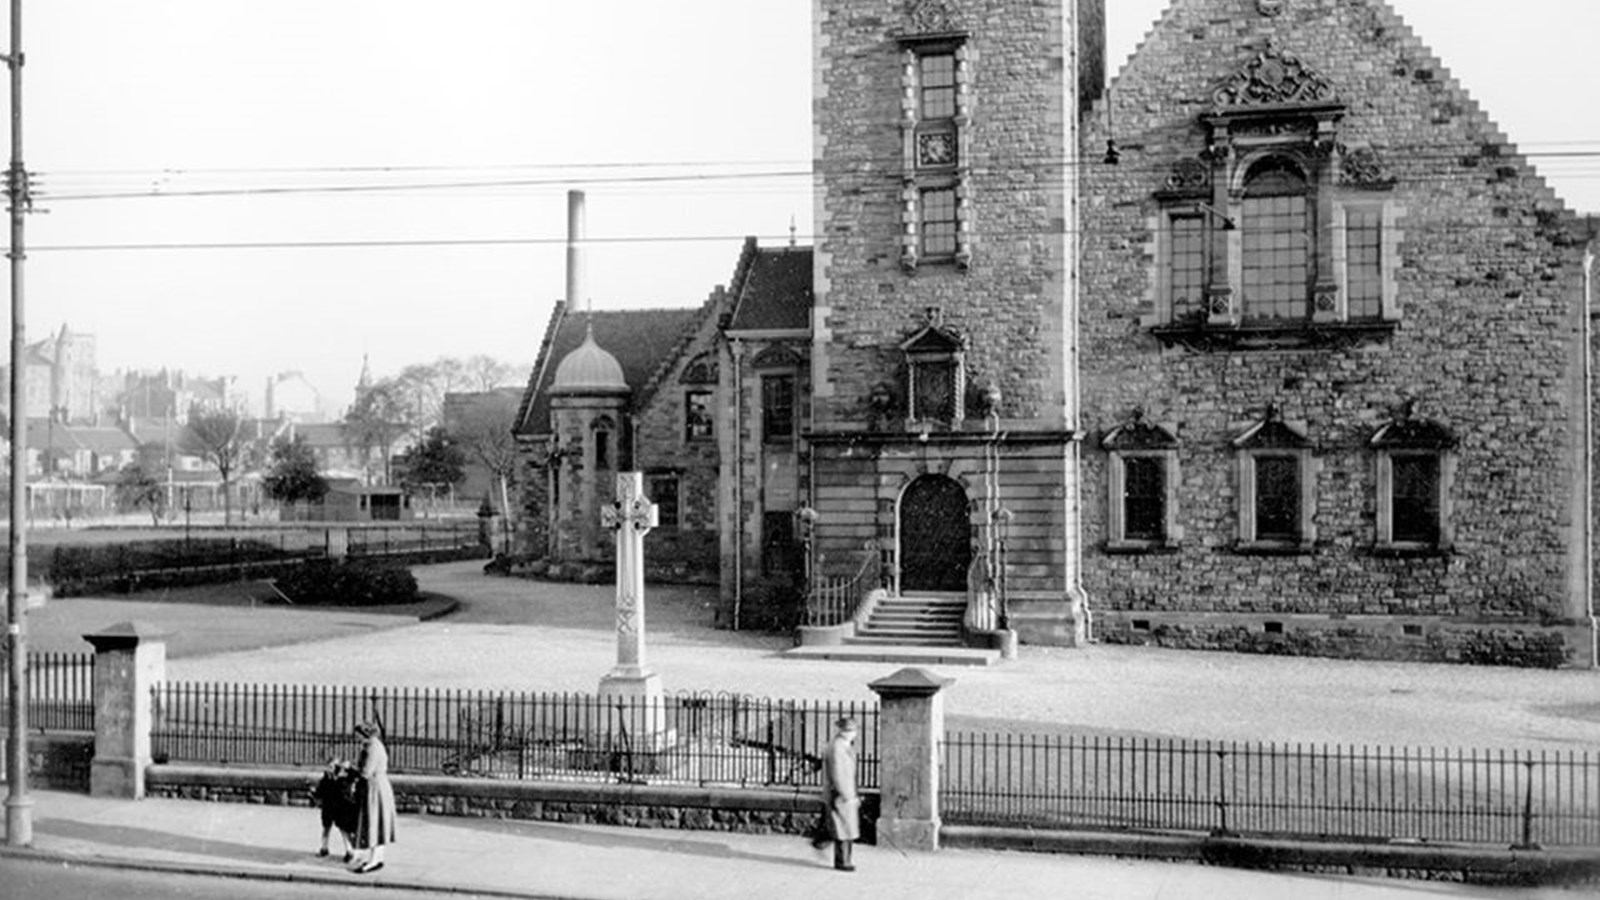 A black and white photo of Pollokshaws Burgh Hall that has a large cross headstone in the grounds with people walking by on the pavement.